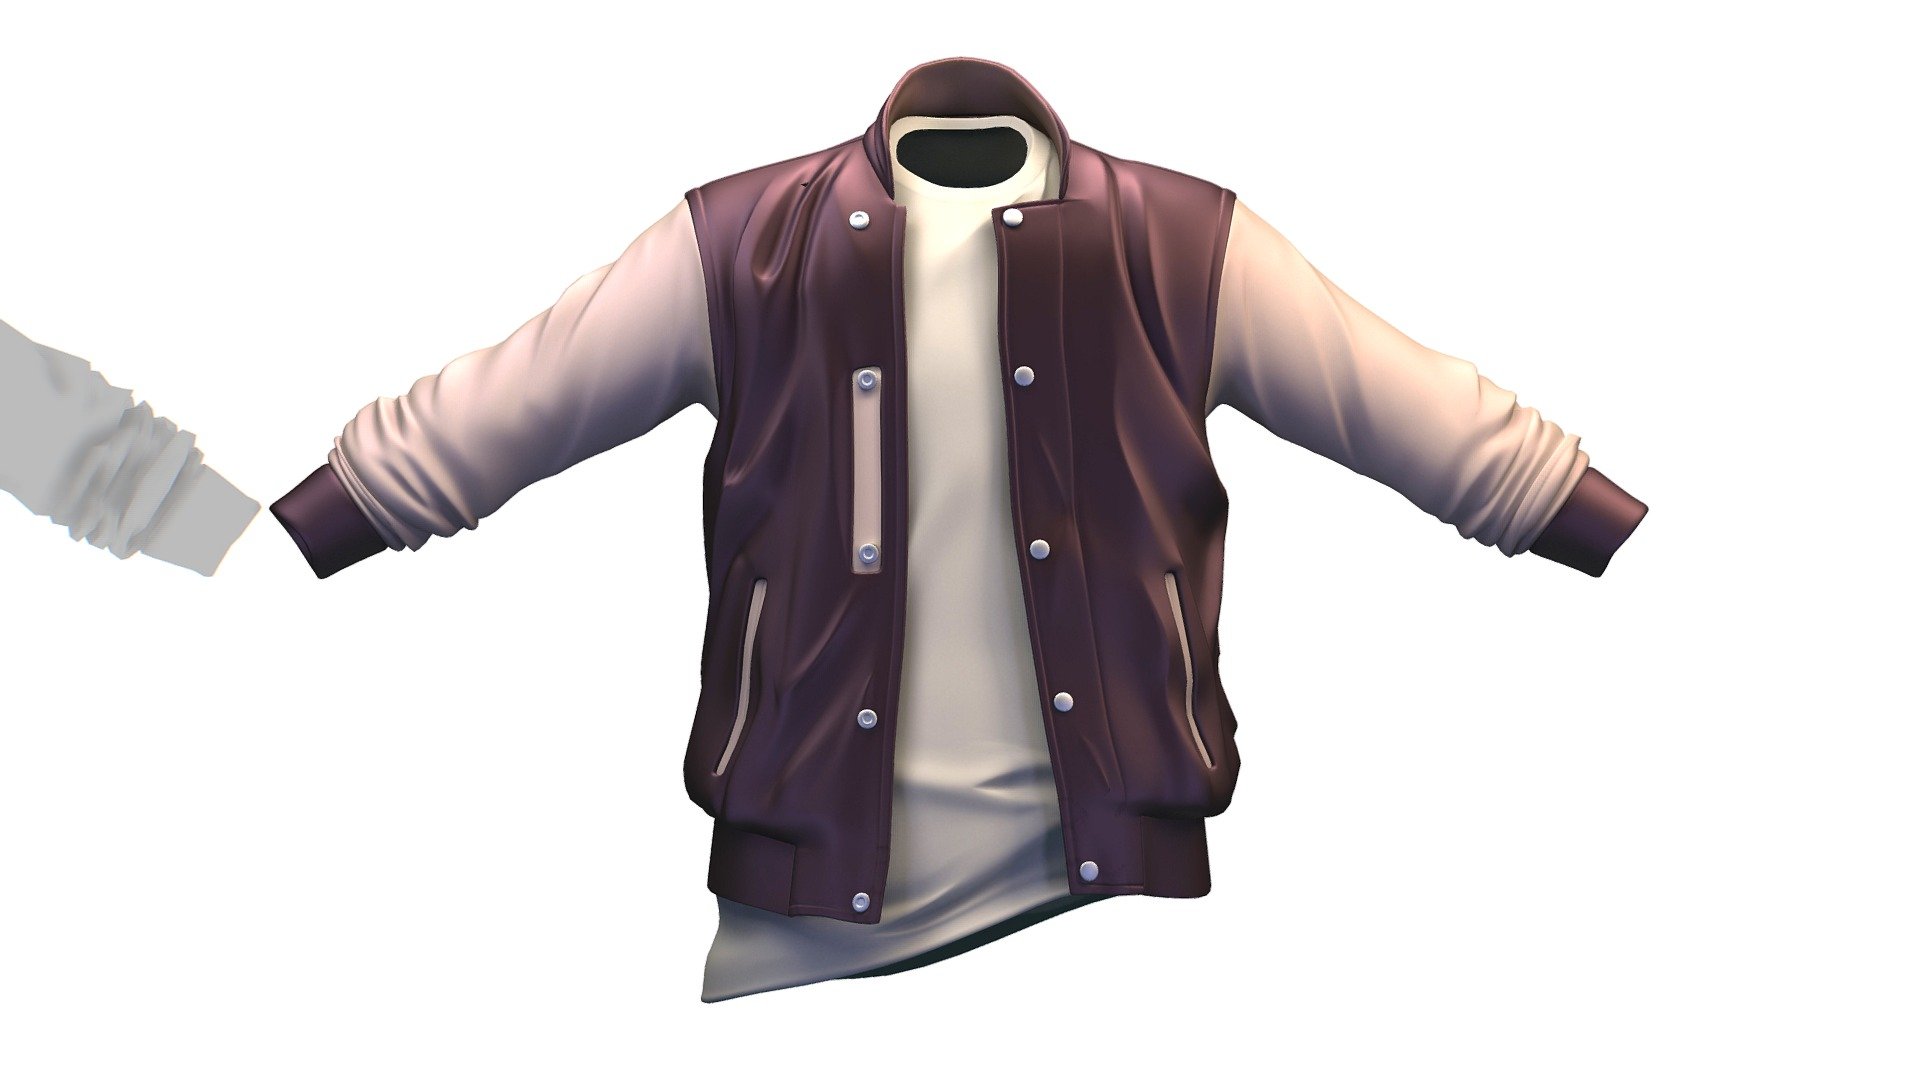 Cartoon High Poly Subdivision Pilot jacket

No HDRI map, No Light, No material settings - only Diffuse/Color Map Texture (4000x4000)

More information about the 3D model: please use the Sketchfab Model Inspector - Key (i) - Cartoon High Poly Subdivision Pilot jacket - Buy Royalty Free 3D model by Oleg Shuldiakov (@olegshuldiakov) 3d model